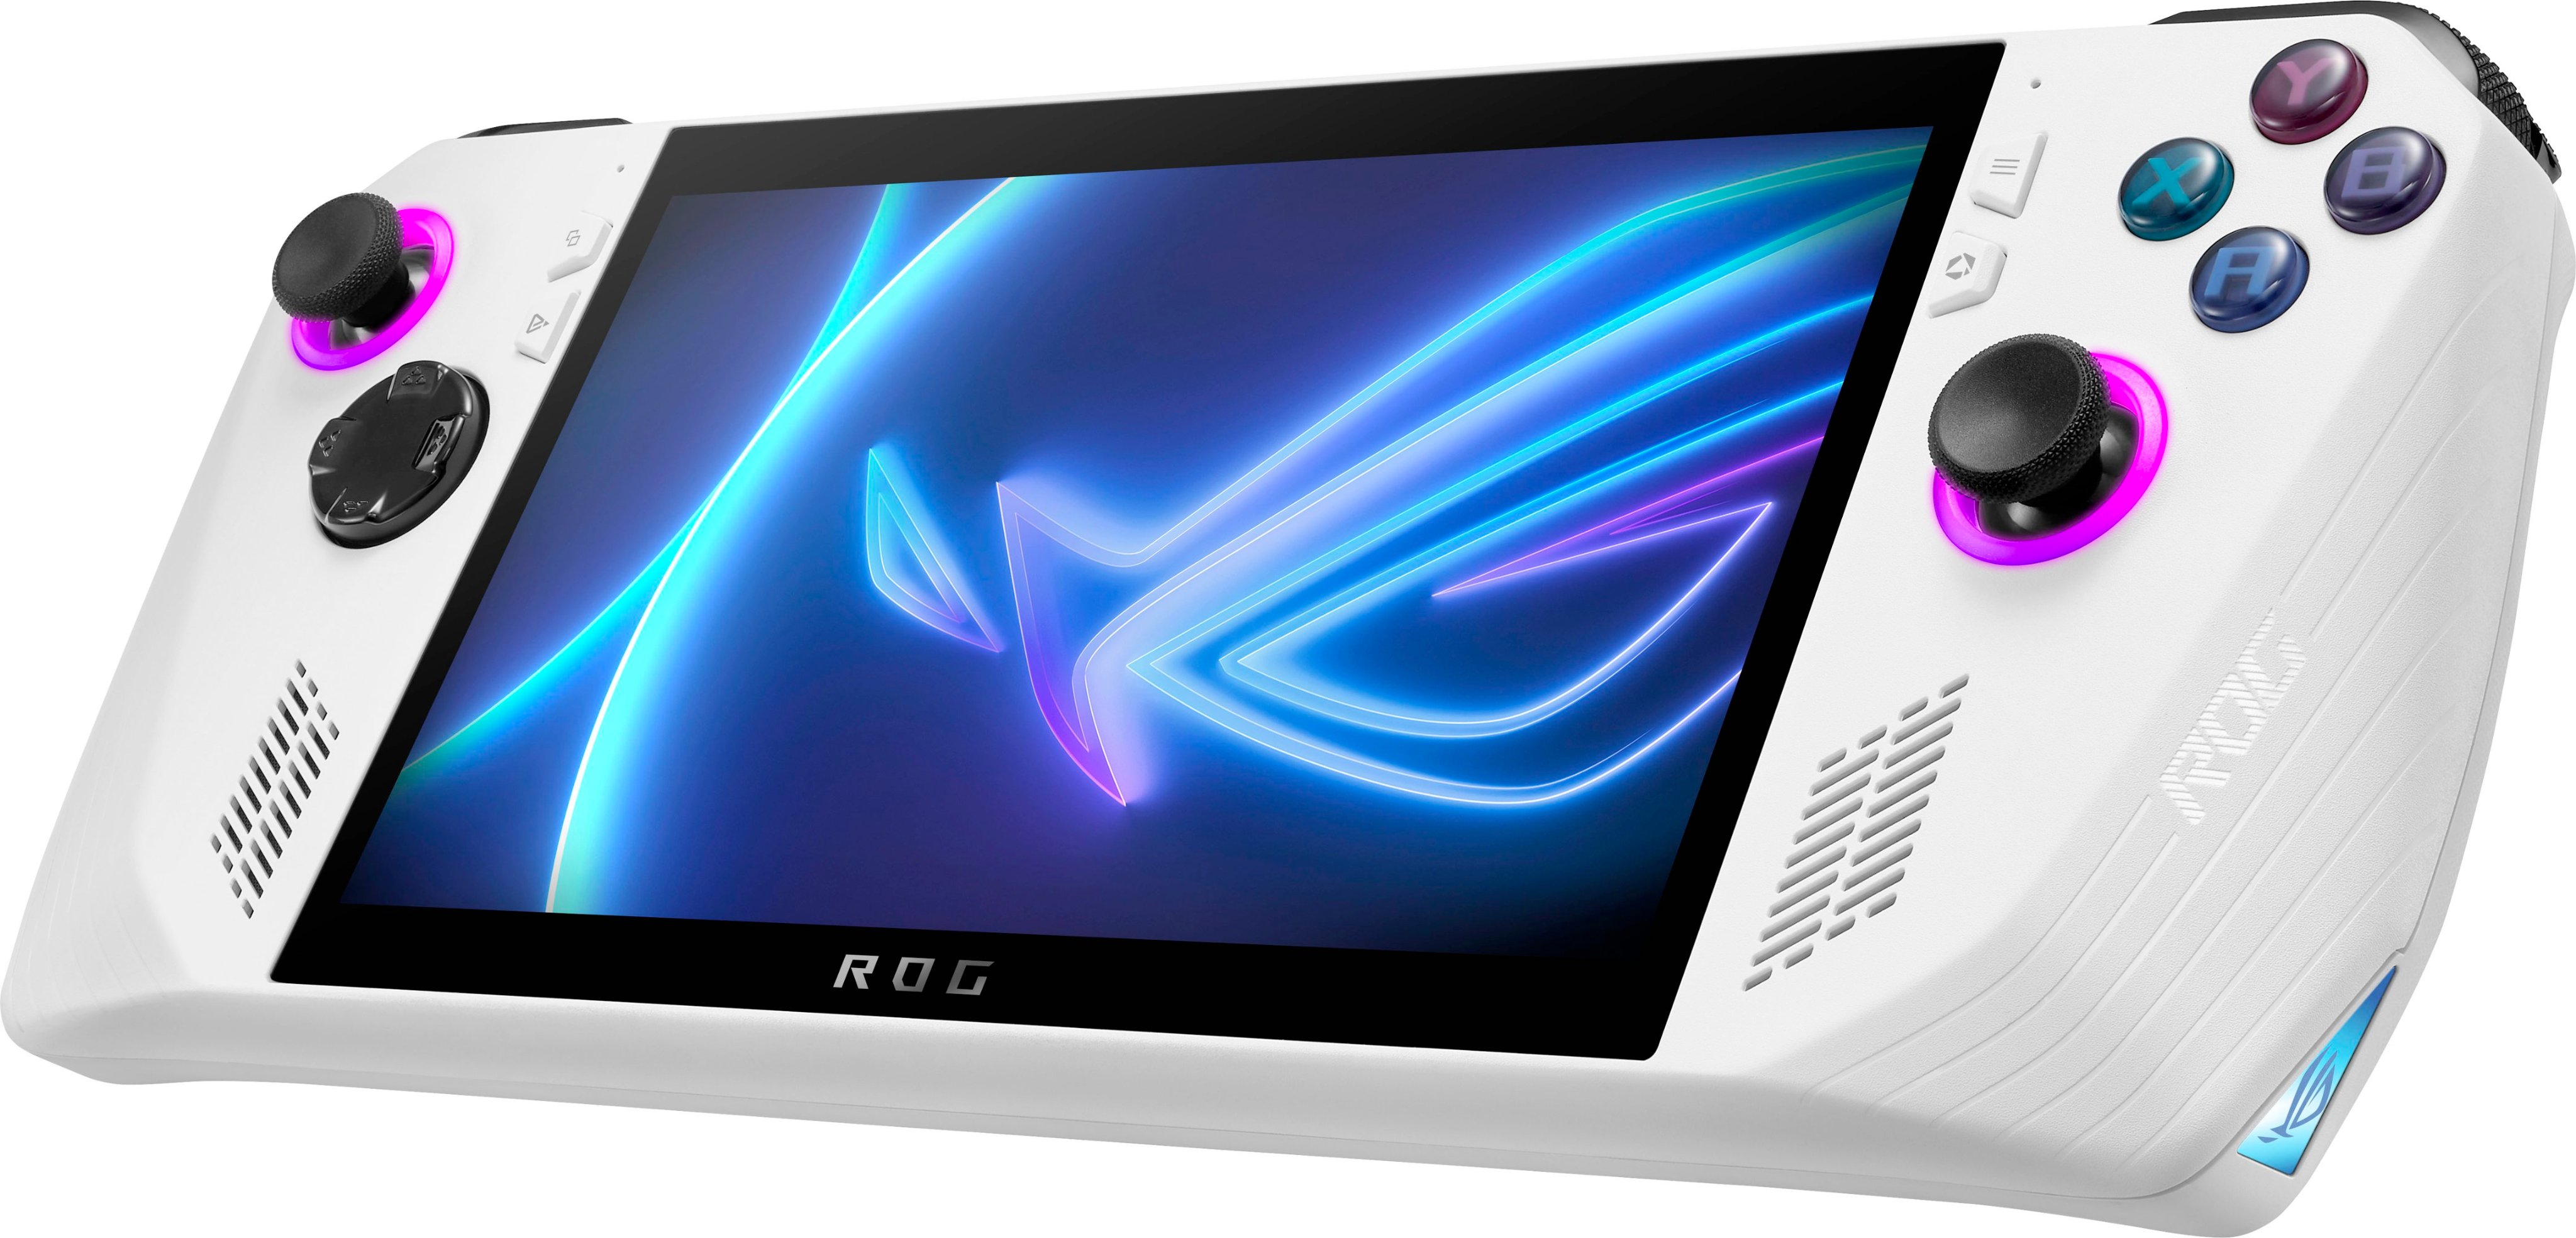 Asus ROG Ally review, release date, and price - Steam Deck's first major  competitor? - Meristation